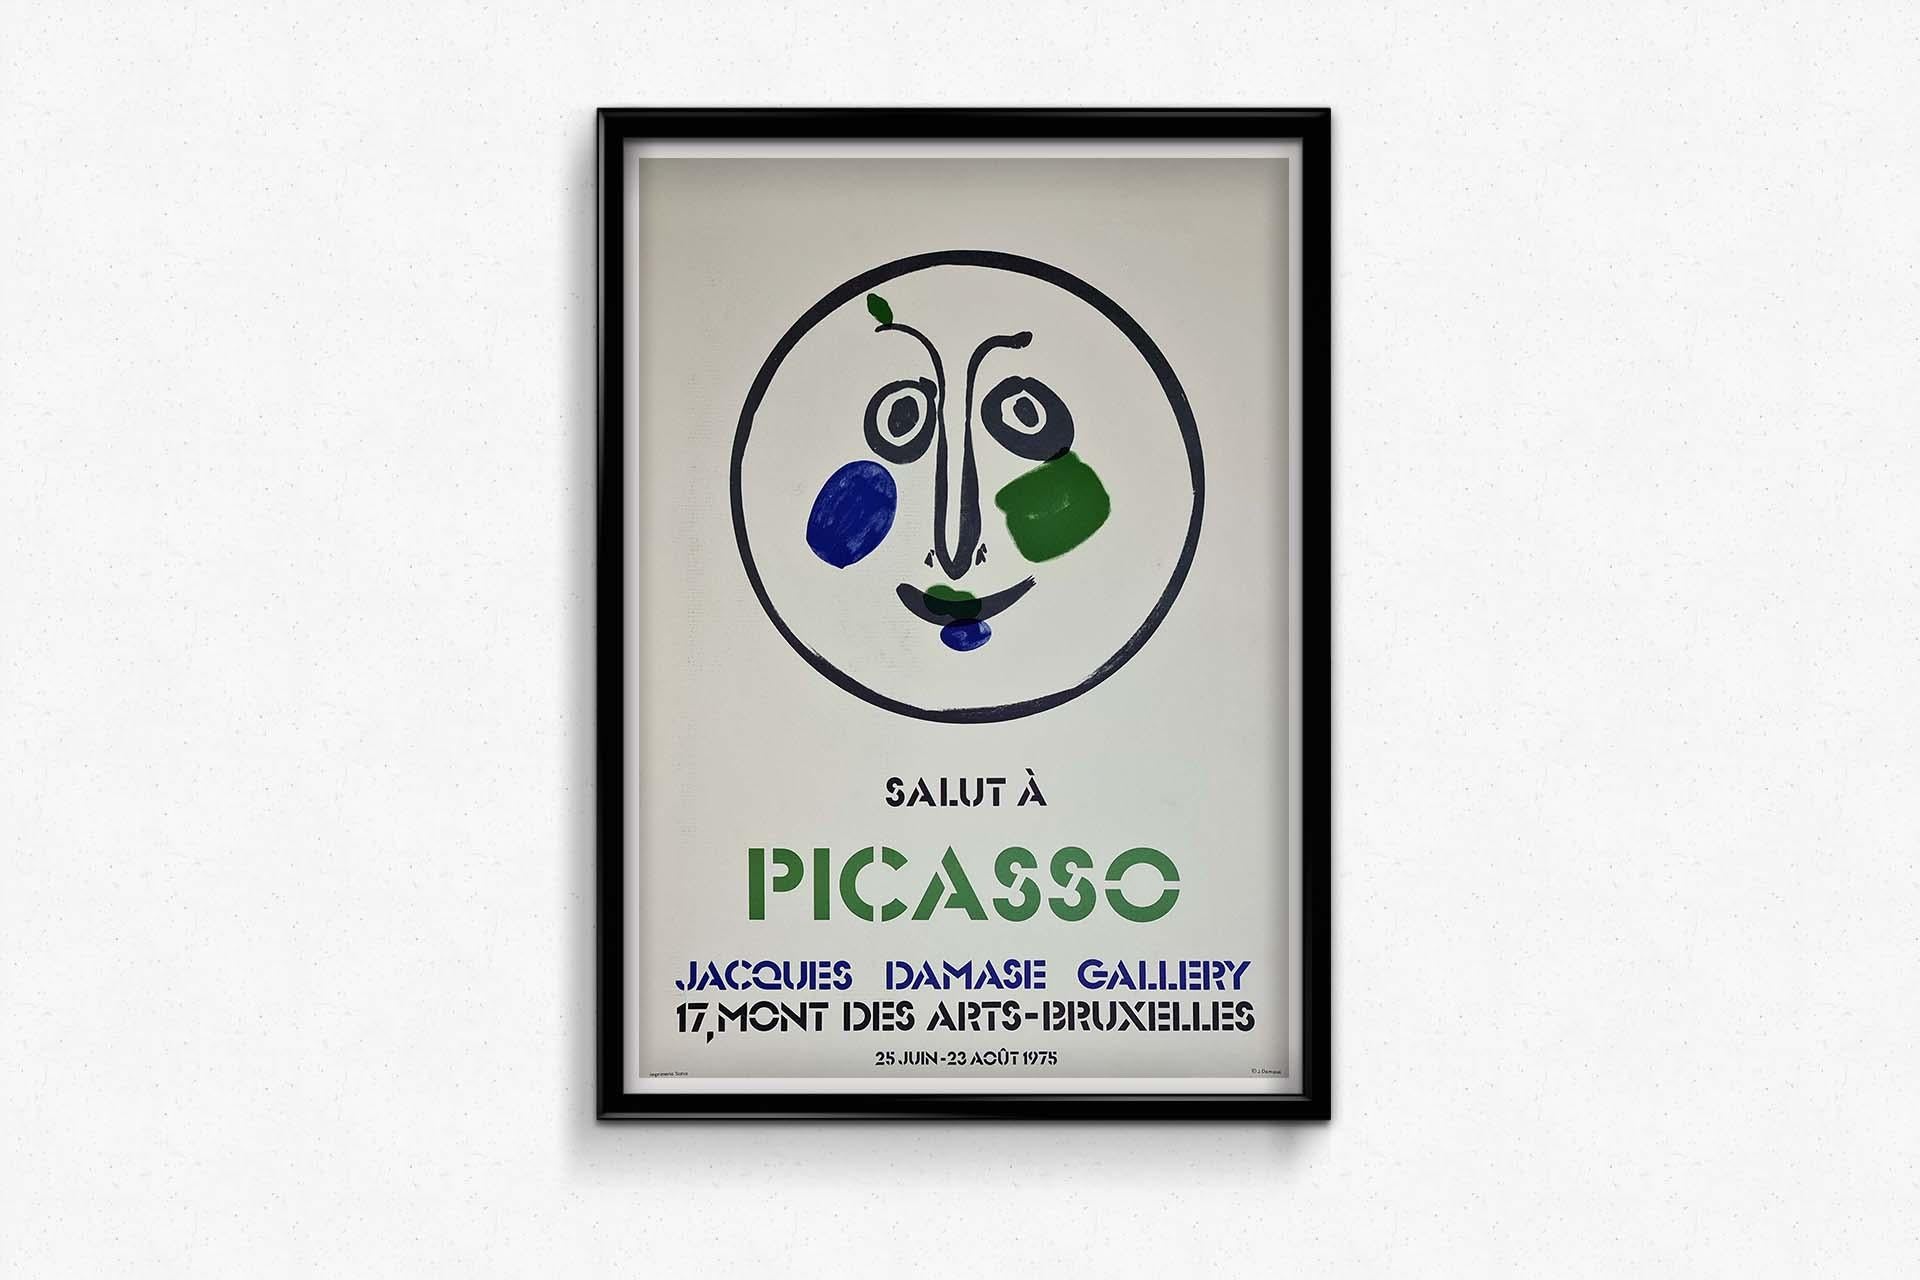 1975 original exhibition poster by Pablo Picasso at the Jacques Damase Gallery For Sale 1